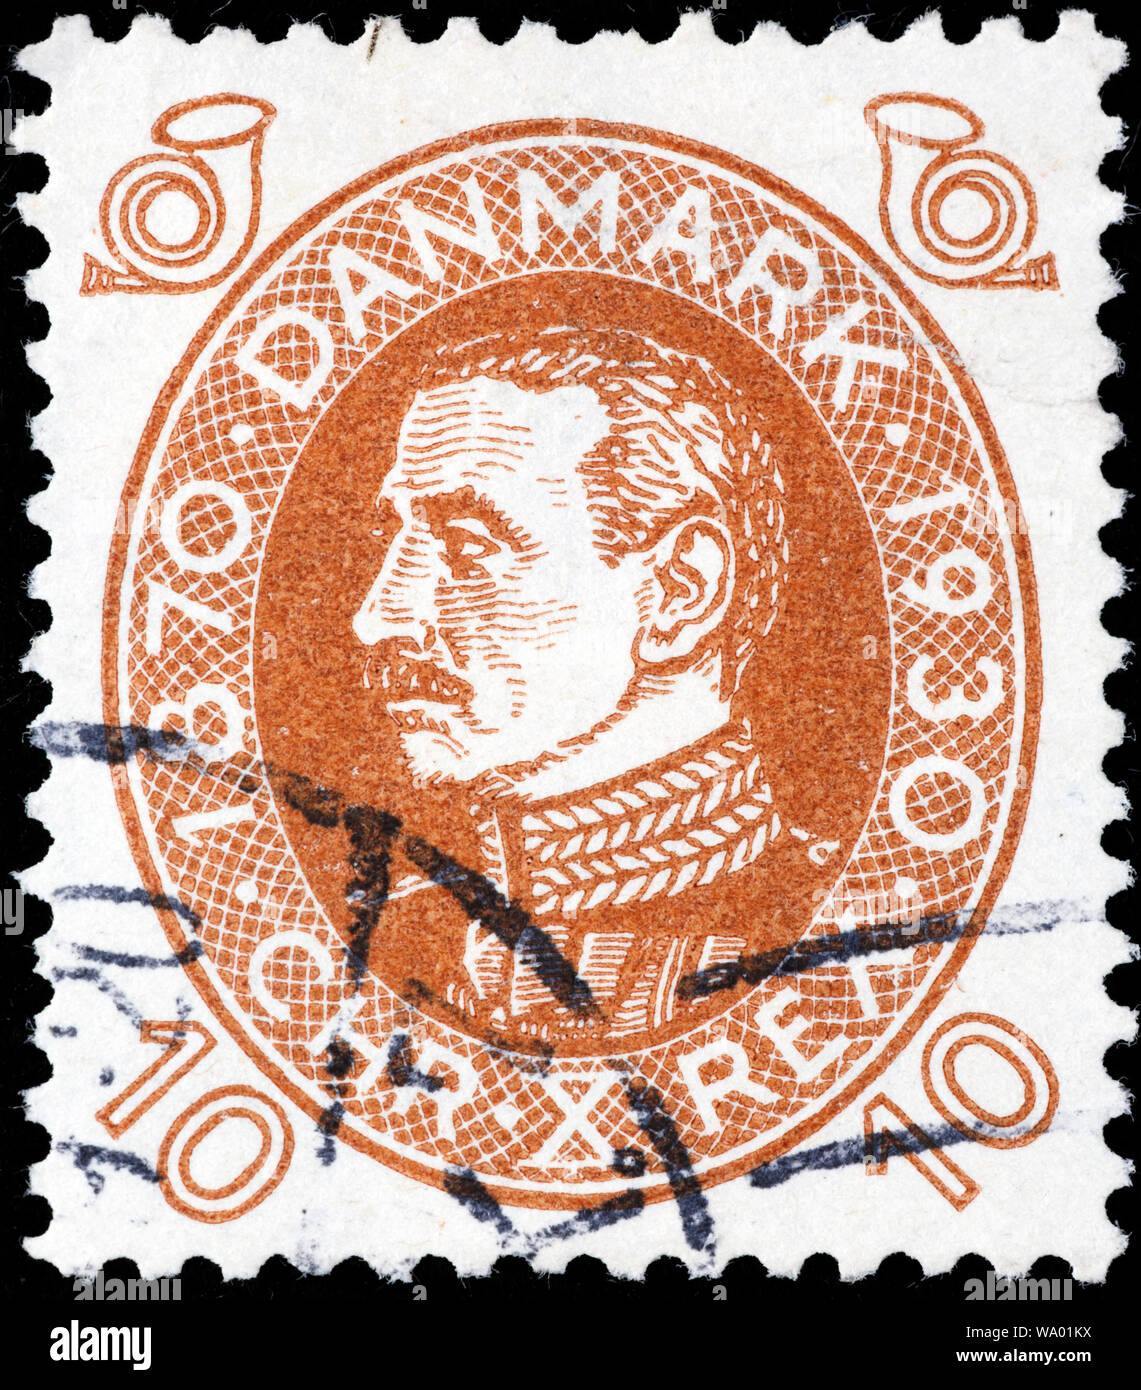 Christian X, King of Denmark and Iceland (1912-1947), postage stamp, Denmark, 1930 Stock Photo